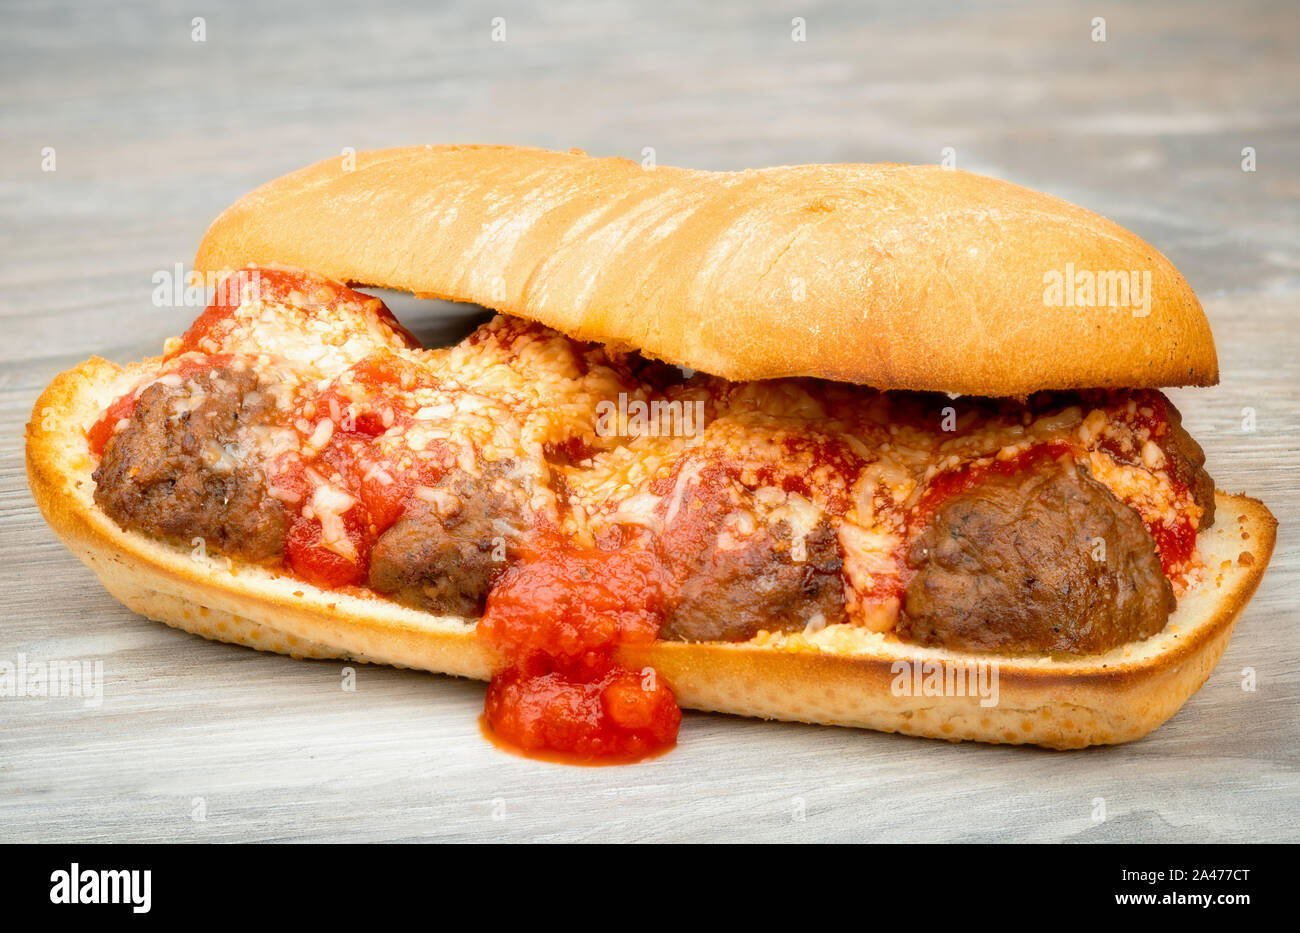 Delicious lunch meatball sandwich with tomato sauce Stock Photo